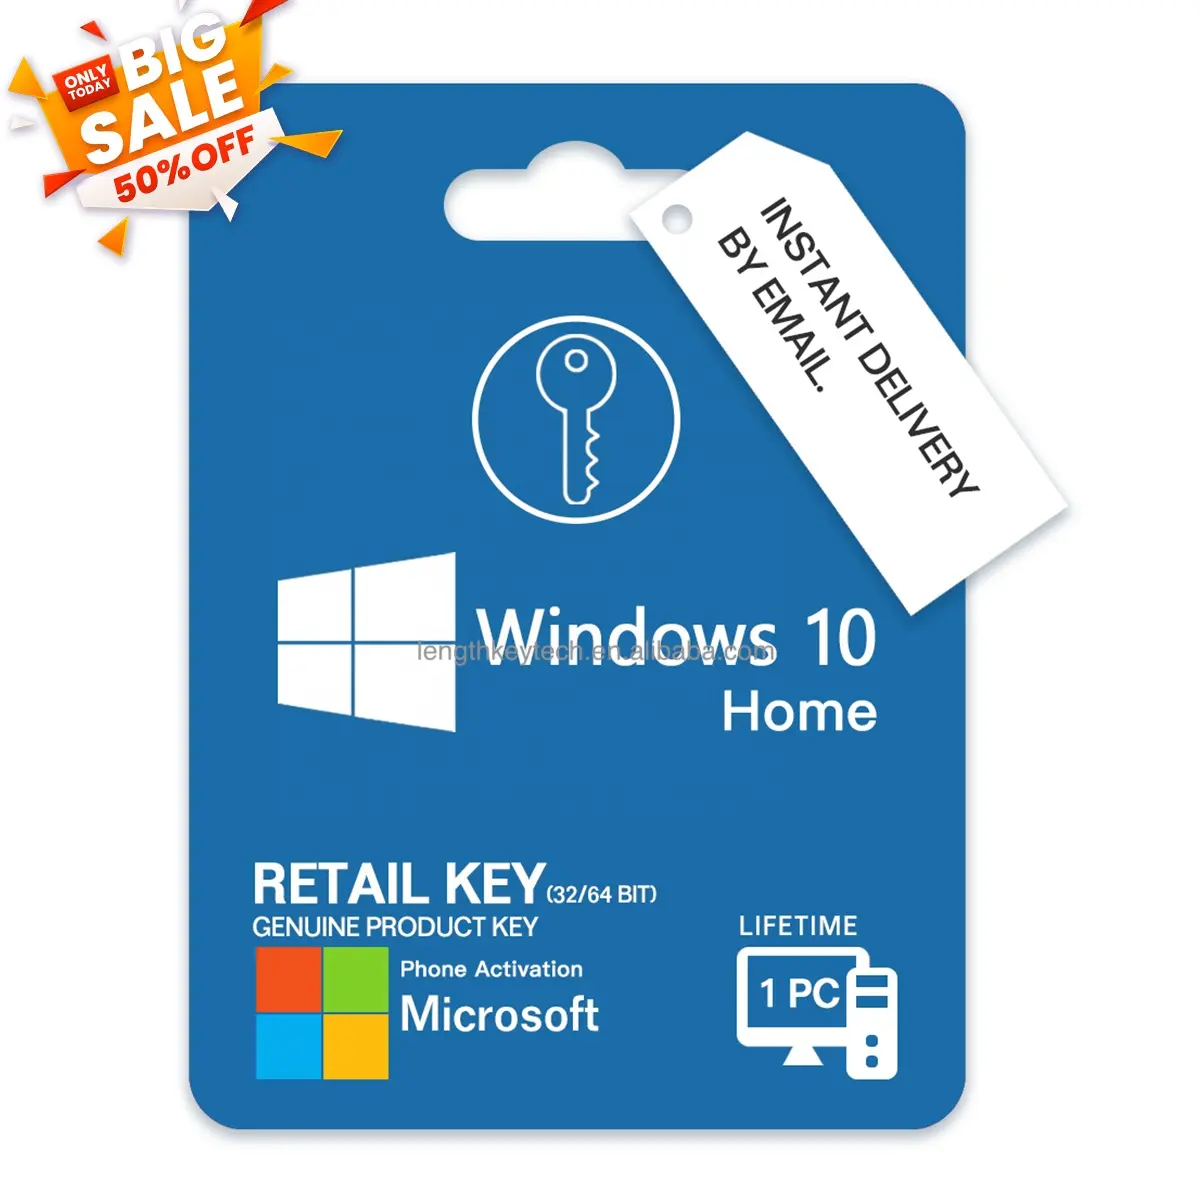 Lowest Price Email Delivery Win 10 Home Retail Key Genuine Original Digital Key Lifetime Phone Activation Win 10 Home Key